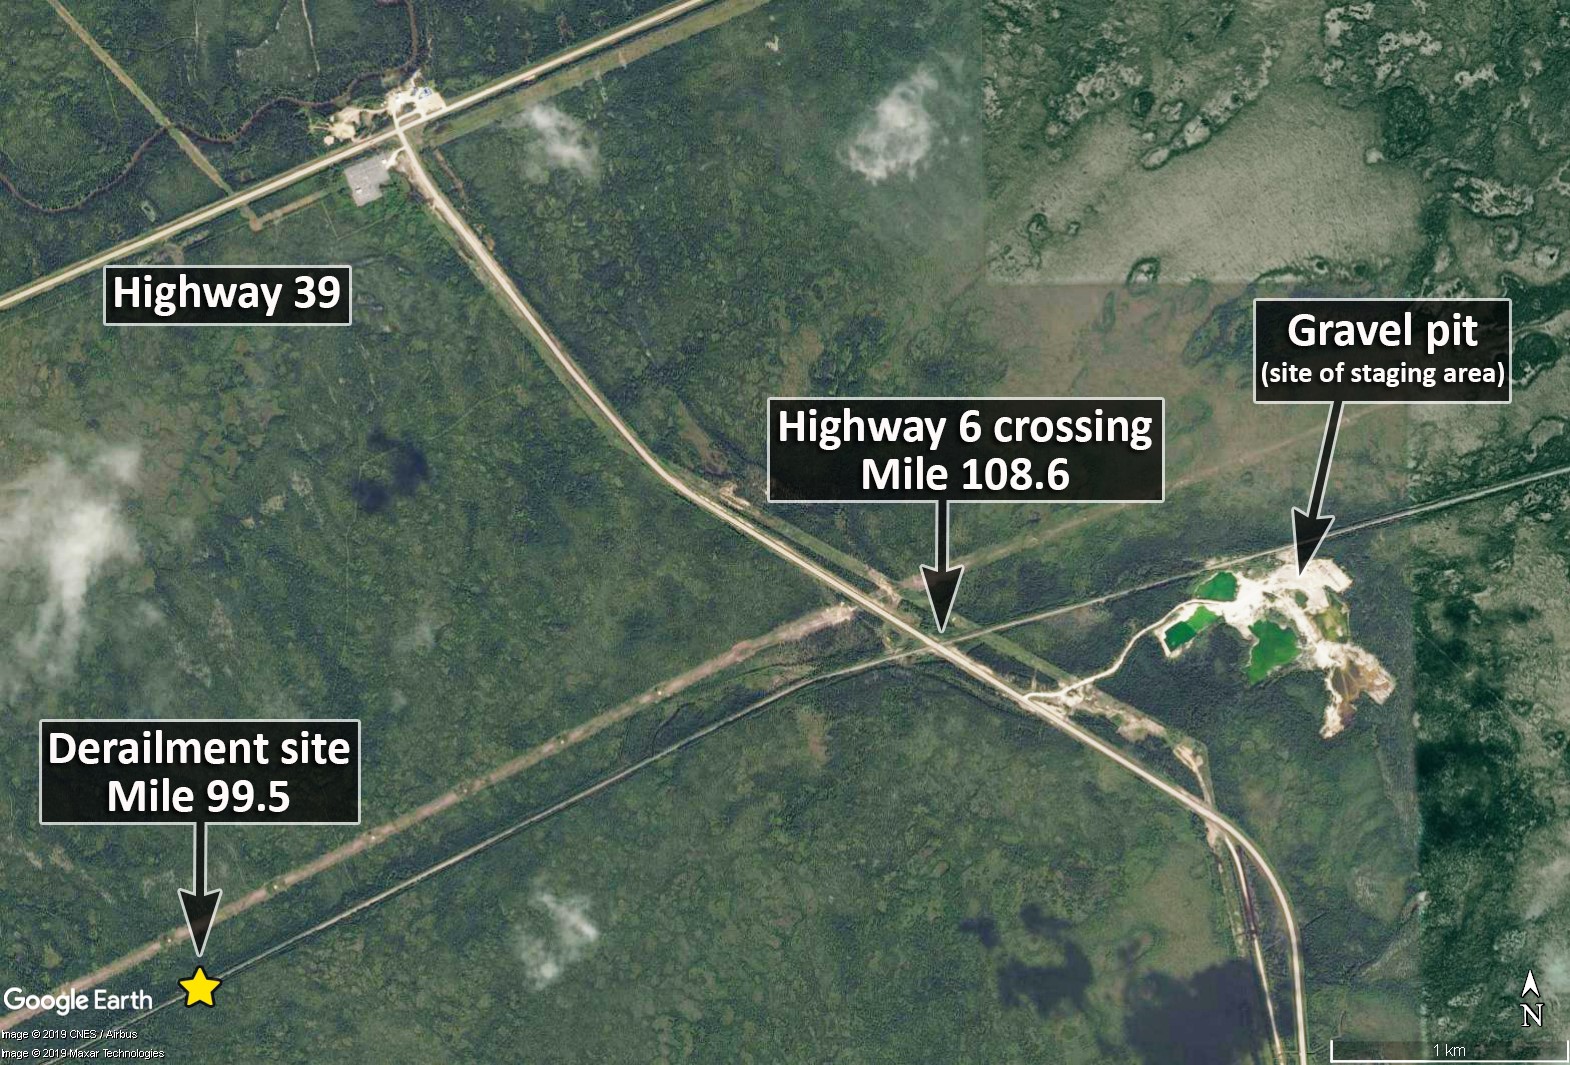 Map of staging area, crossing, and derailment site (Source: Google Earth, with TSB annotations)